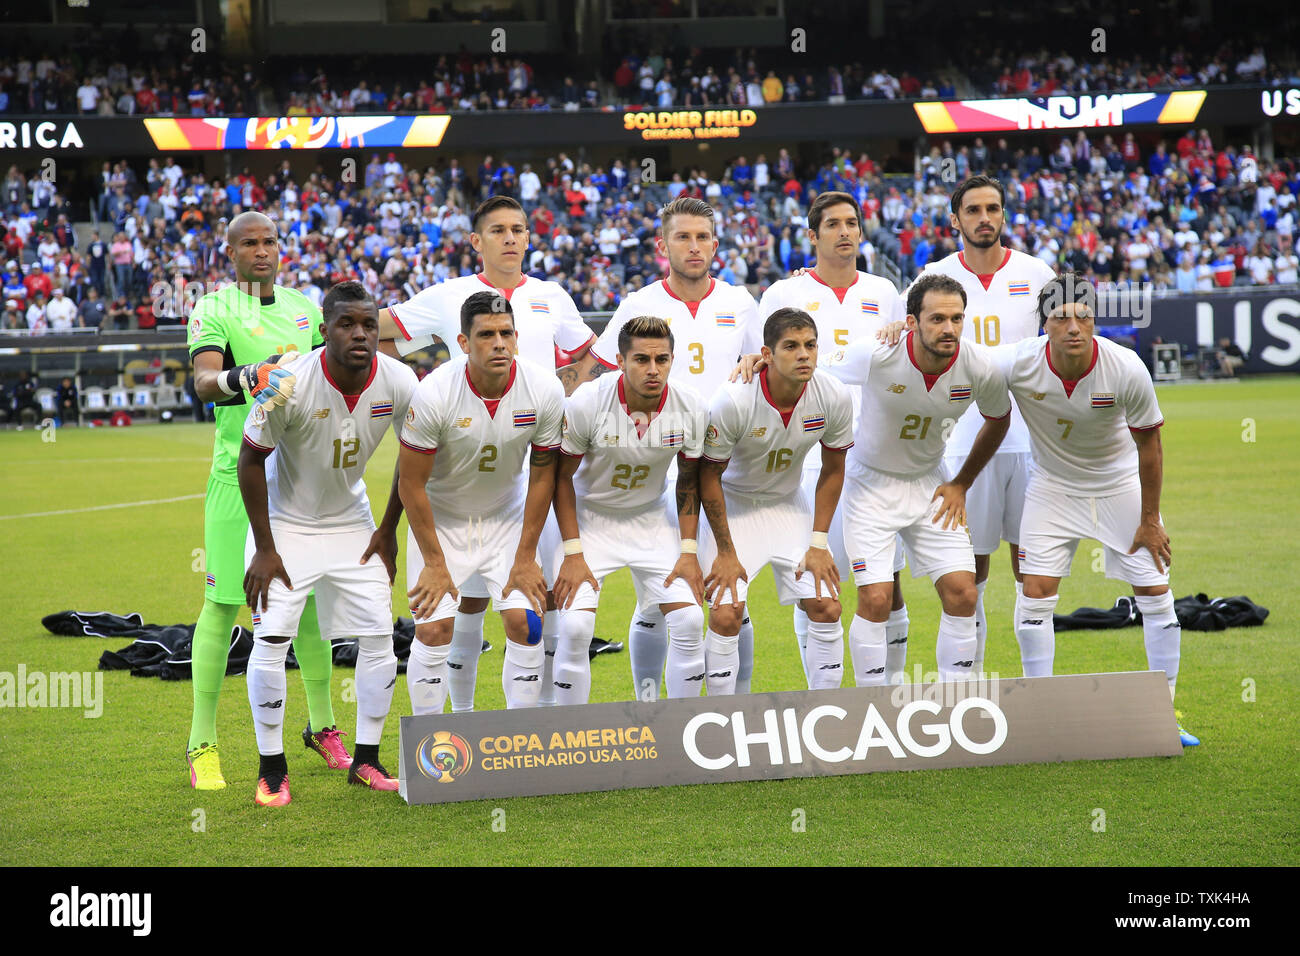 Costa Rica's Joel Campbell (Front L-R), Johnny Acosta, Ronald Matarrita, Cristian Gamboa, Marco Urena, Christian Bolanos (Back L-R), Patrick Pemberton, Oscar Duarte, Francisco Calvo, Celso Borges and Bryan Ruiz pose for a team photo before a 2016 Copa America Centenario Group A match against the United States at Soldier Field in Chicago on June 7, 2016. The United States defeated Costa Rica 4-0.     Photo by Brian Kersey/UPI Stock Photo